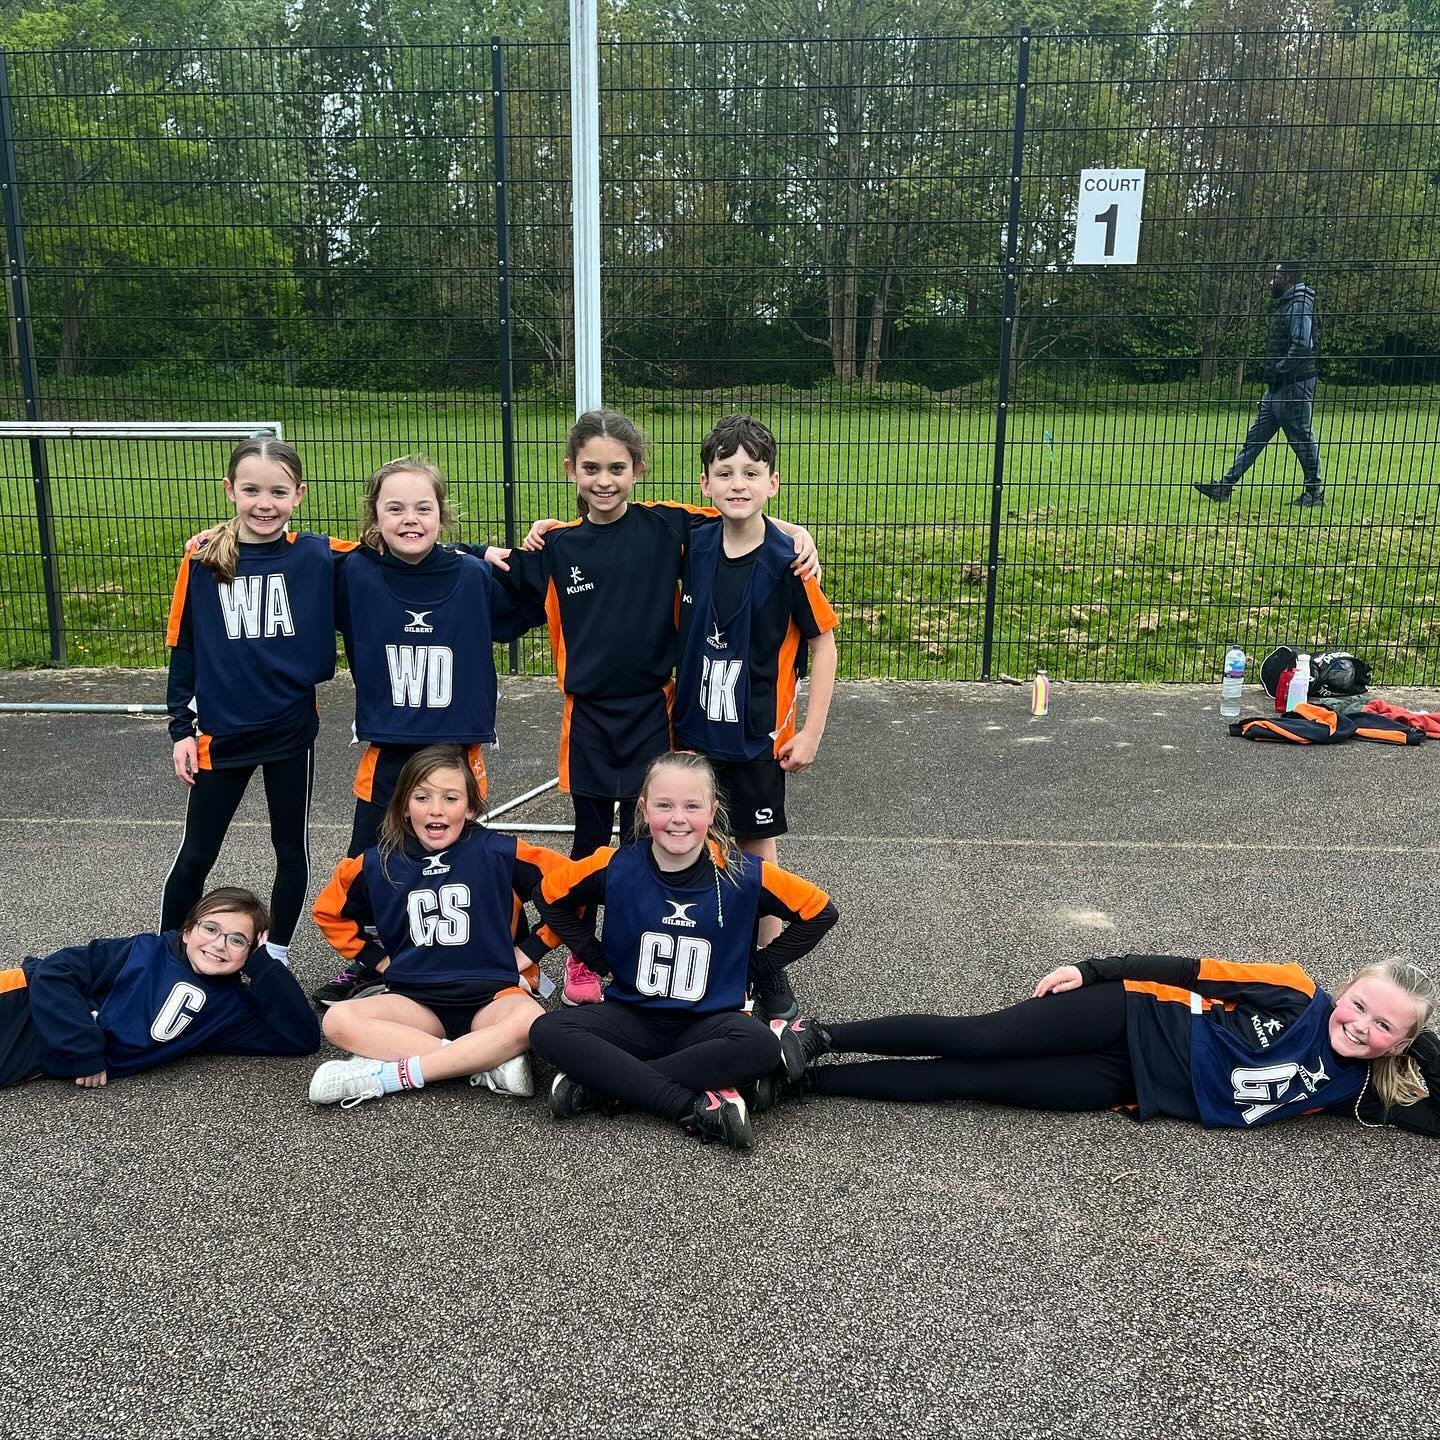 Another 2 games and another 2 wins for the amazing U9 squad tonight. Navy&rsquo;s beat a strong Hatfield side 5-2, great work team! The Oranges won against Turnford 17-0, great effort all round!
Navy- CPOM Maia, OPOM + PPOM Vi.
Orange- CPOM and PPOM 